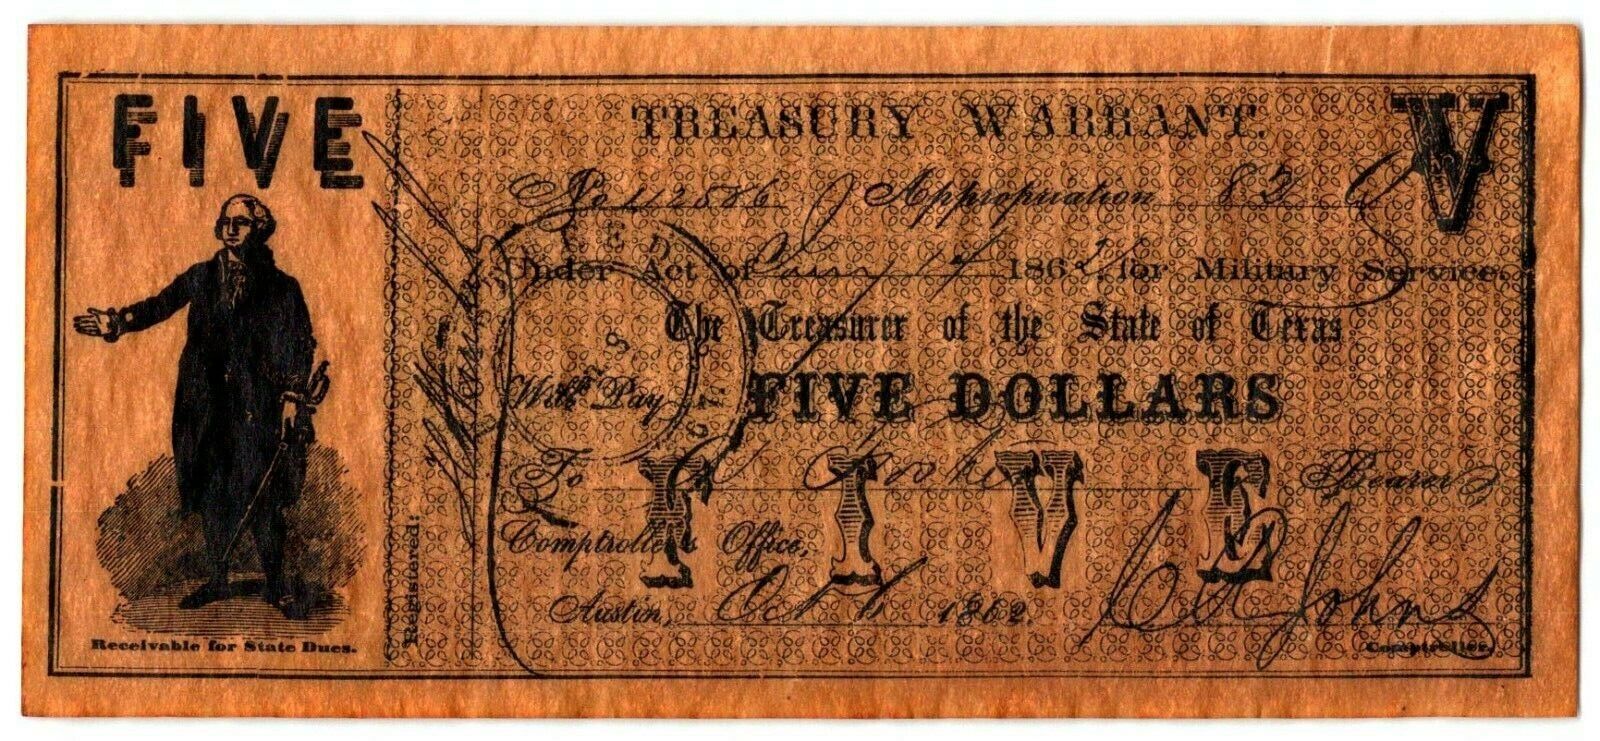 VTG Reproduction~ Souvenir $5 Treasurer Of the State Of Texas Treasury Warrent